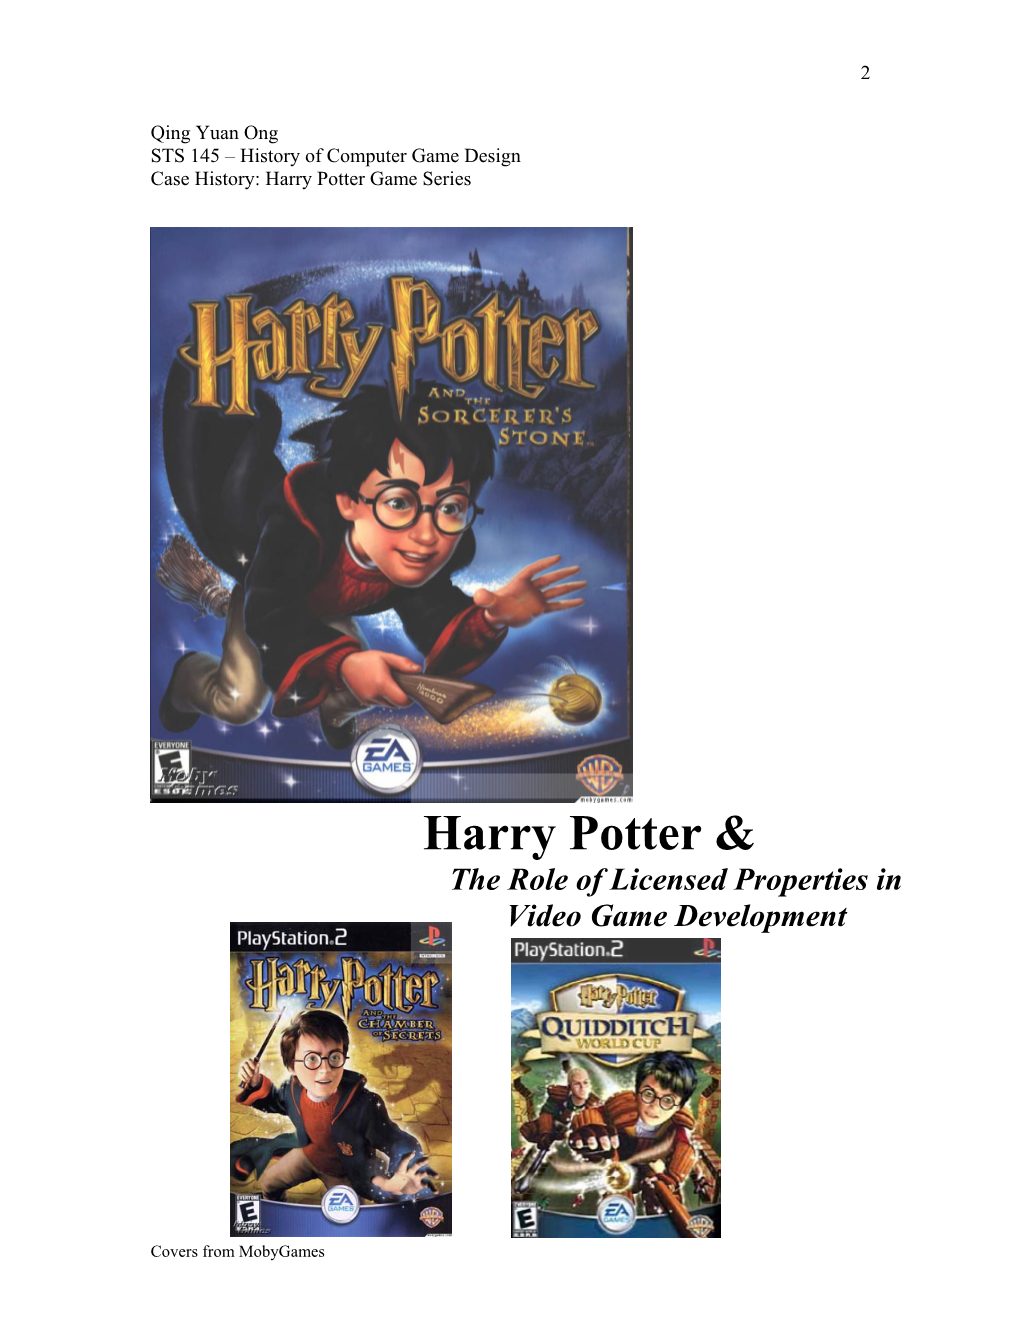 Qing Yuan Ong STS 145 – History of Computer Game Design Case History: Harry Potter Game Series